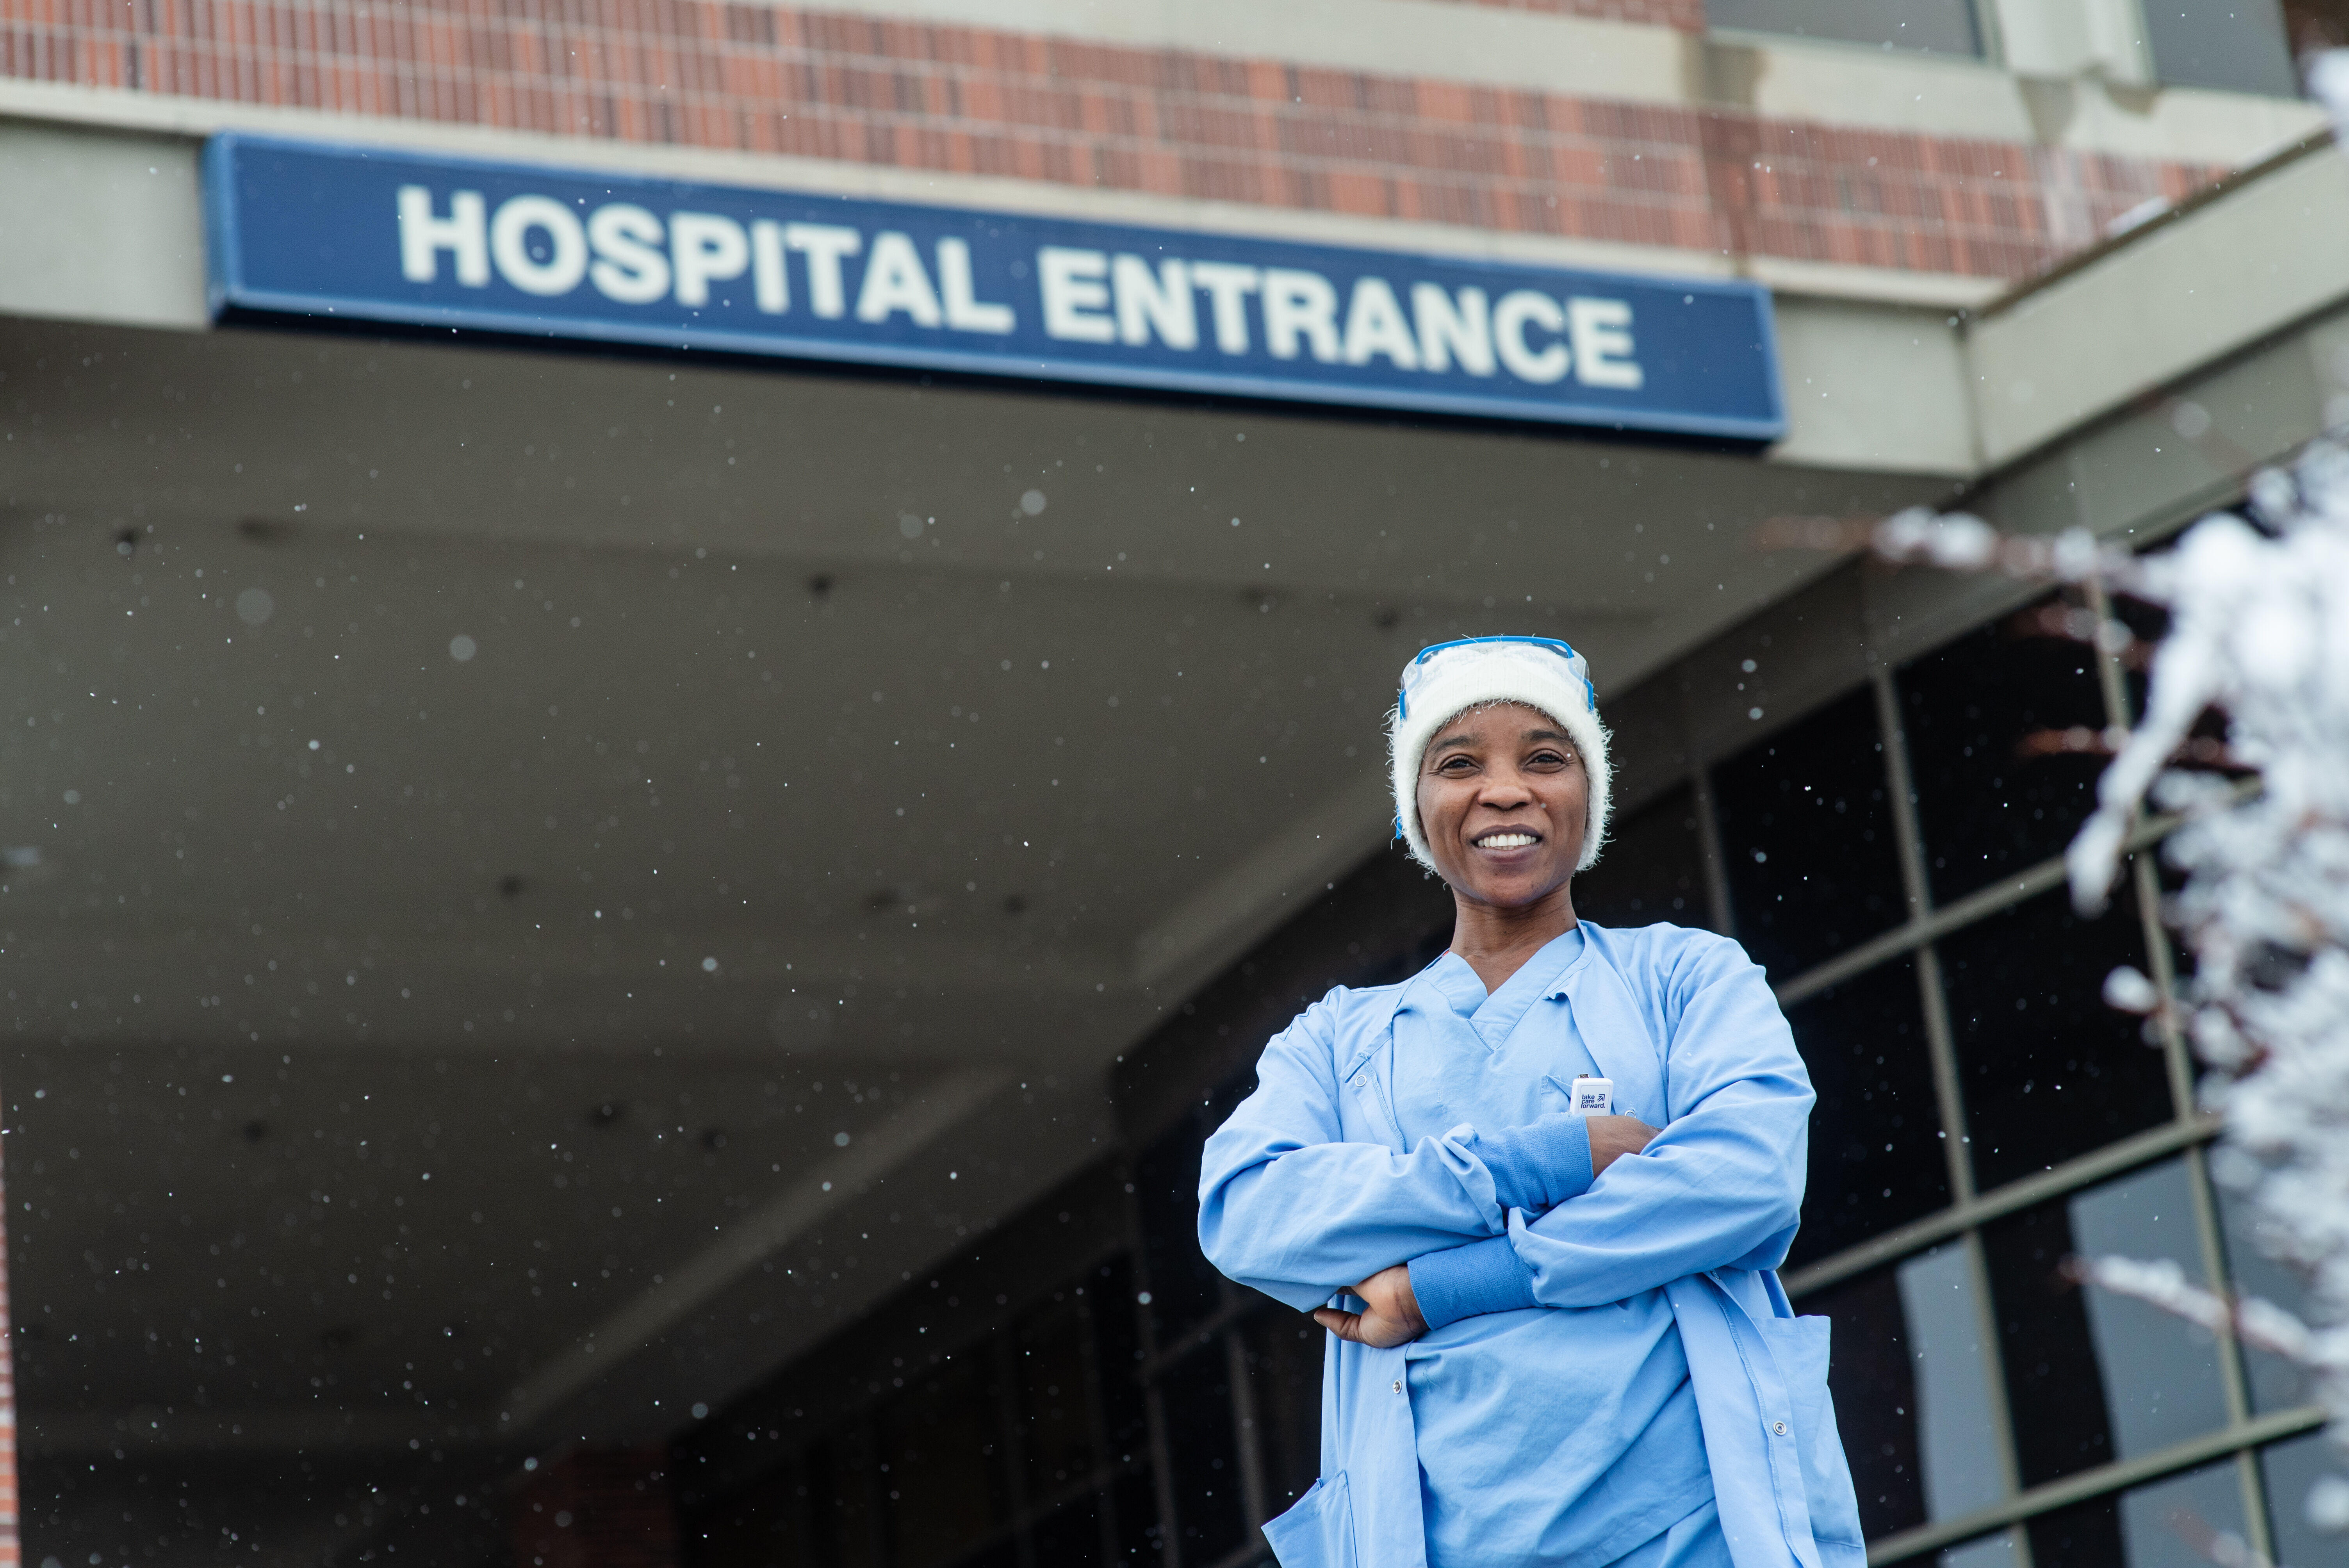 Nabila stands with her arms crossed and smiling in front of the hospital where she works. She is wearing blue scrubs and a white winter hat.